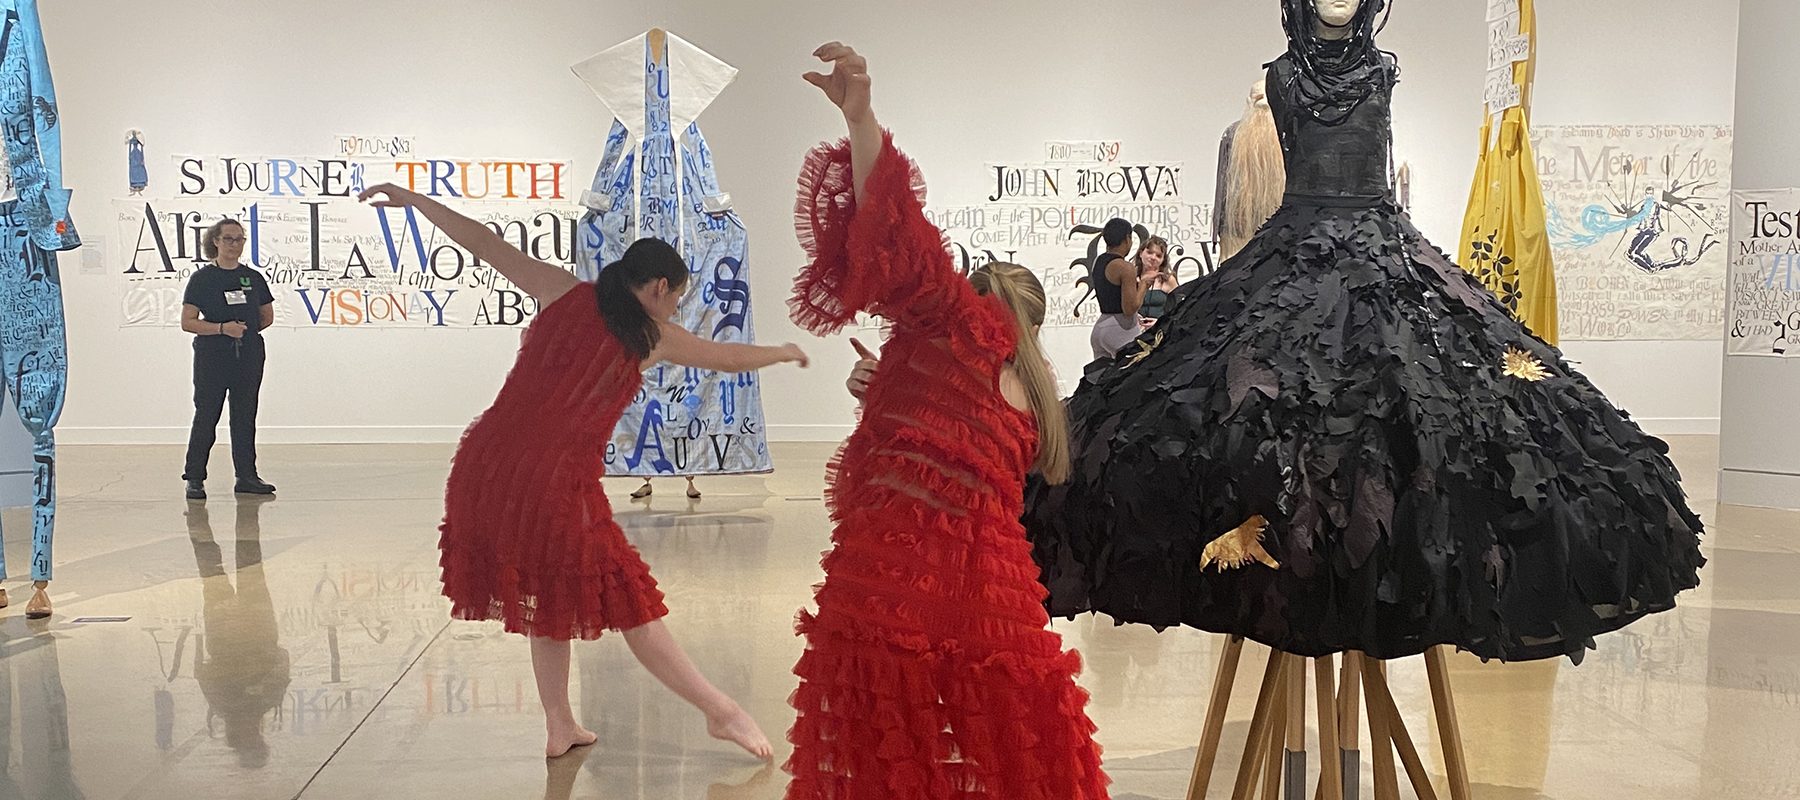 Dancers perform around artwork in a gallery.